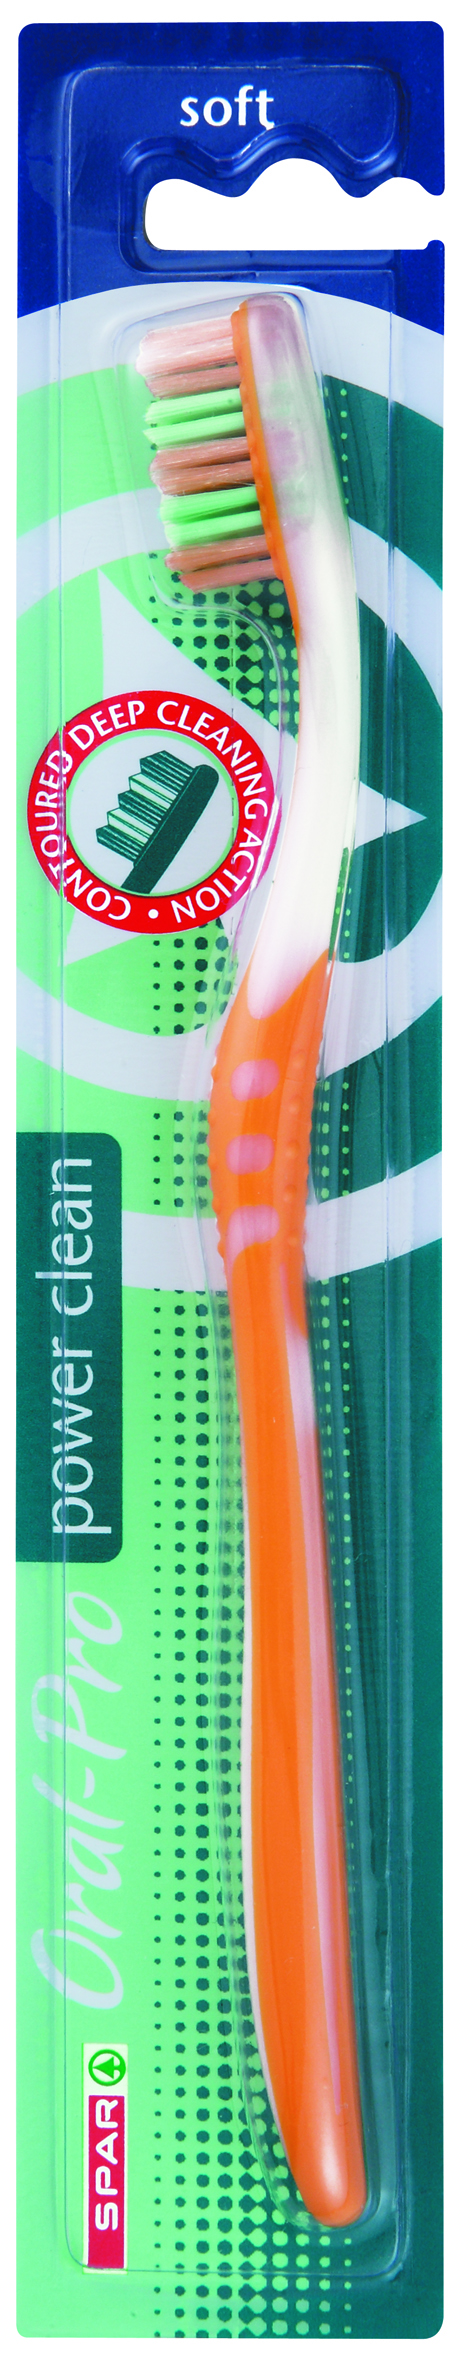 oral pro toothbrush power clean - soft